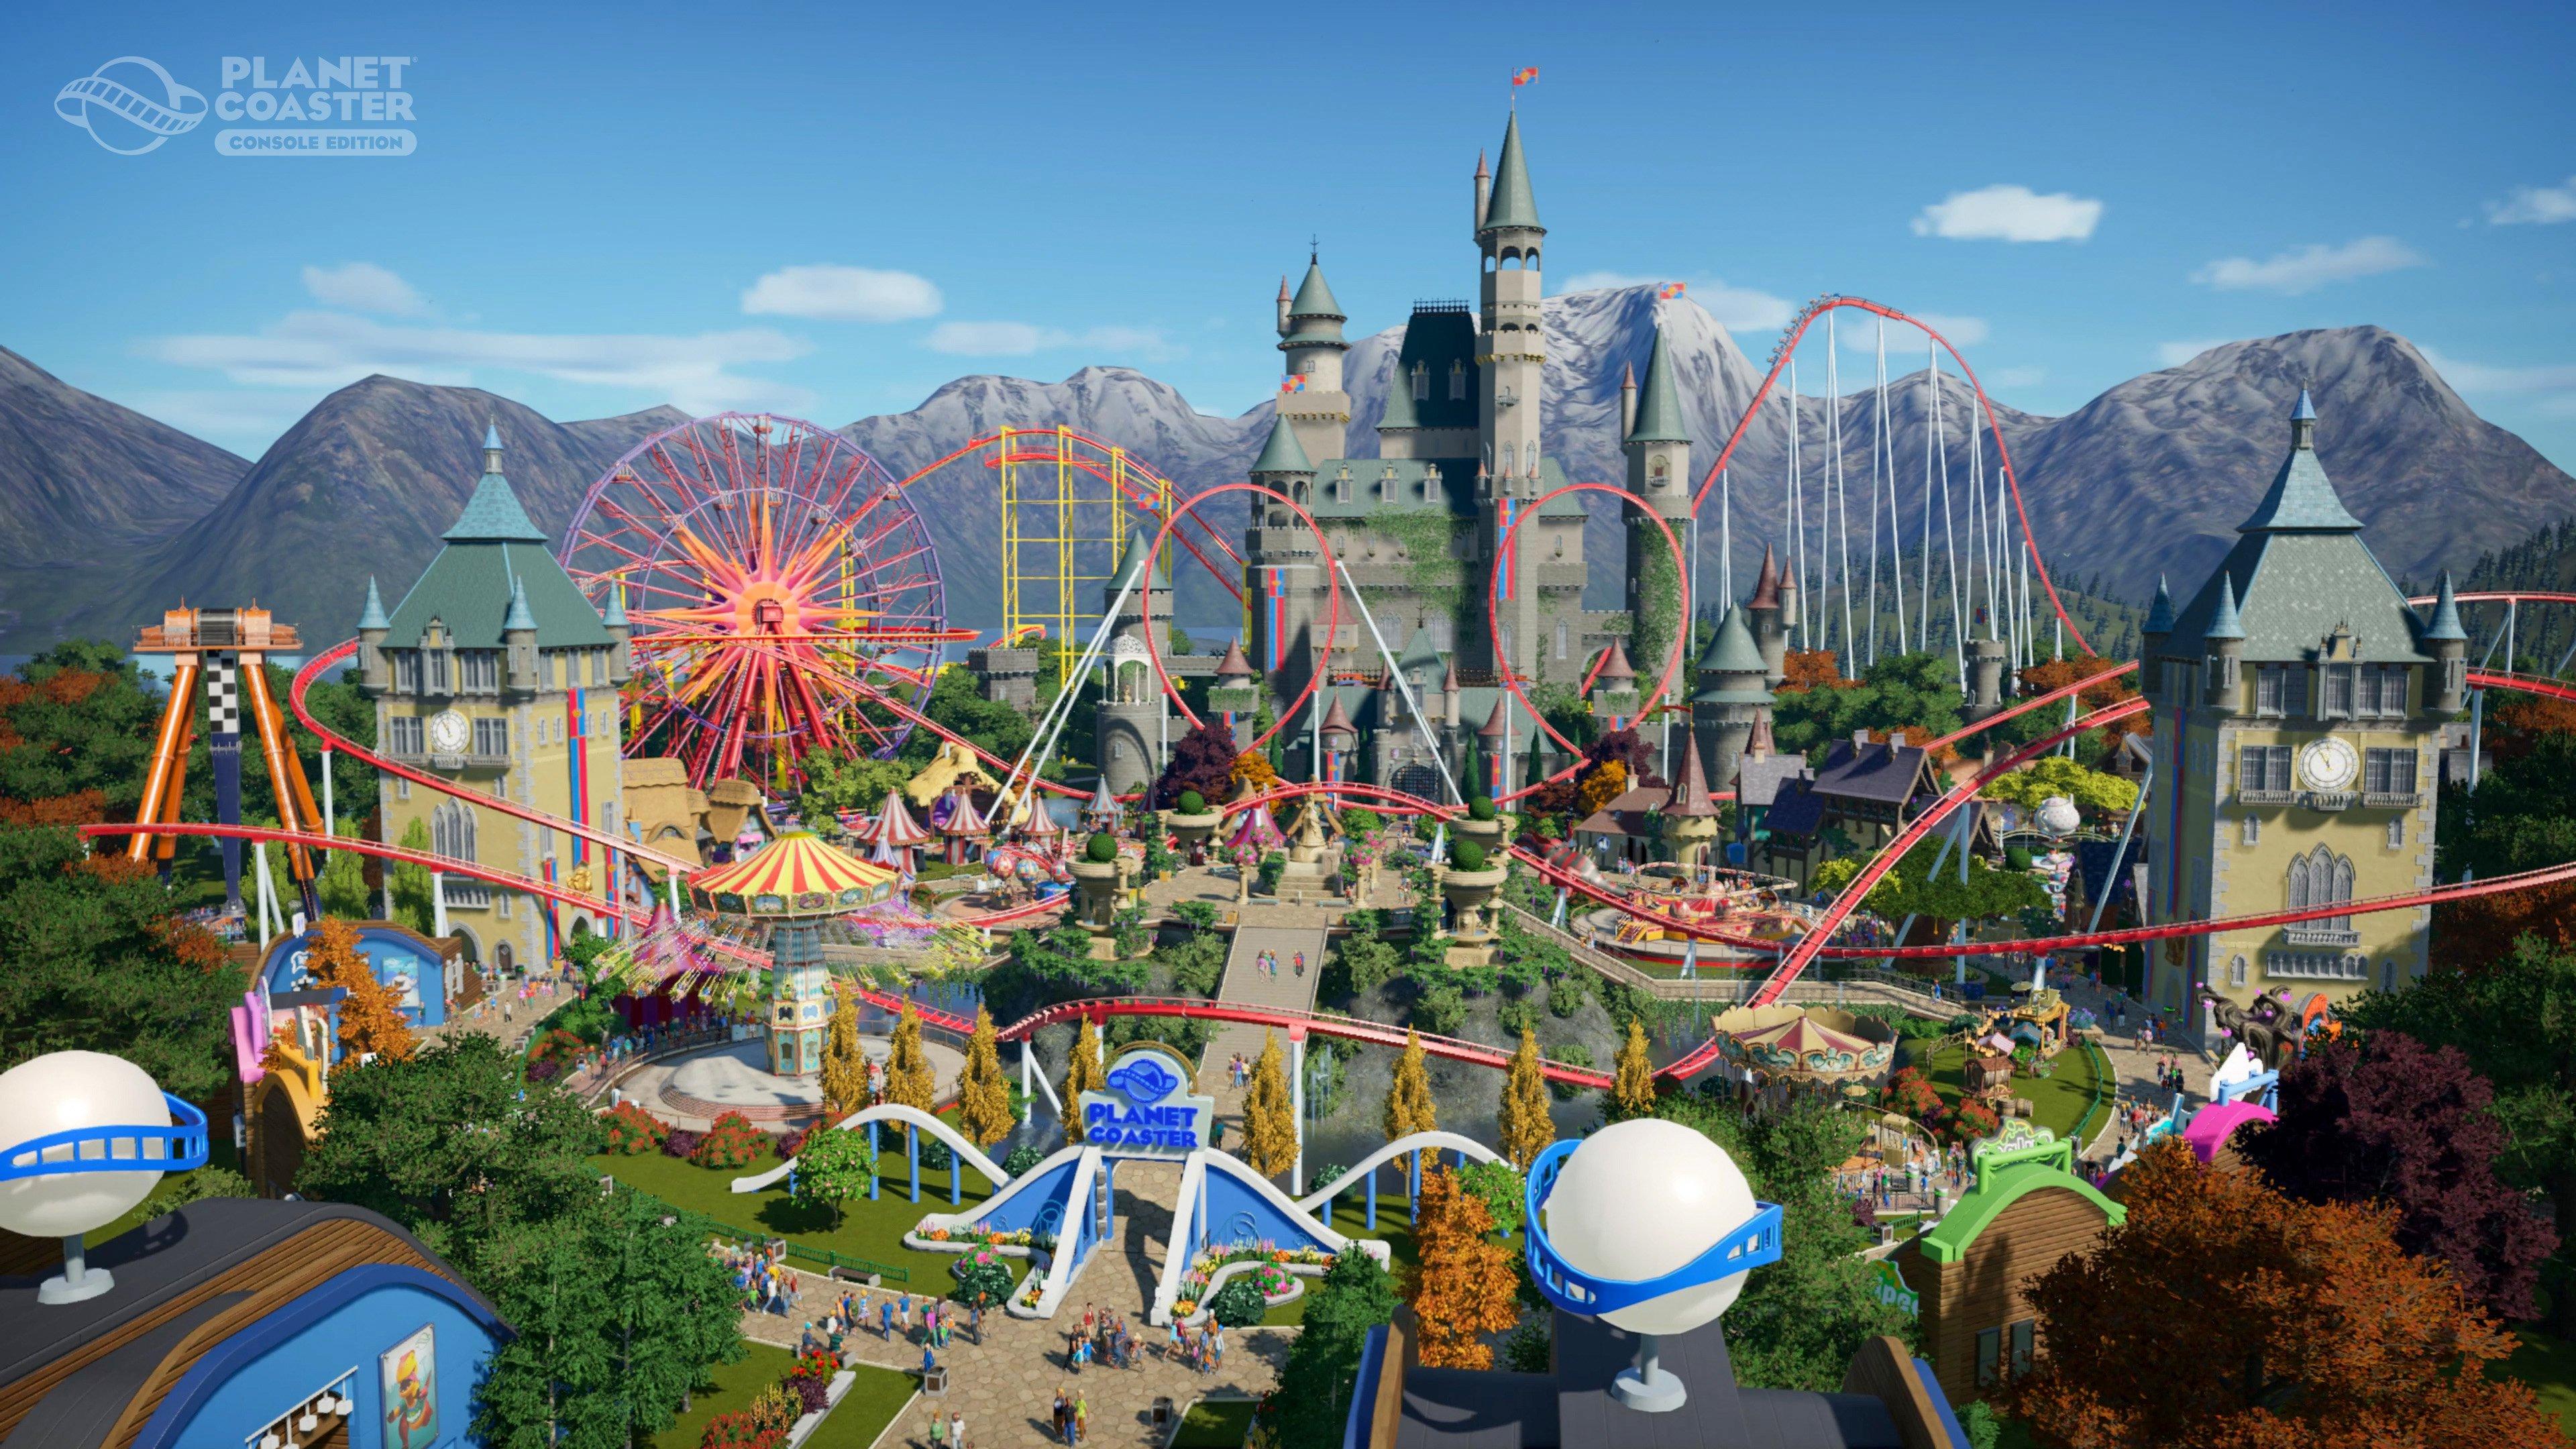 planet coaster ps3